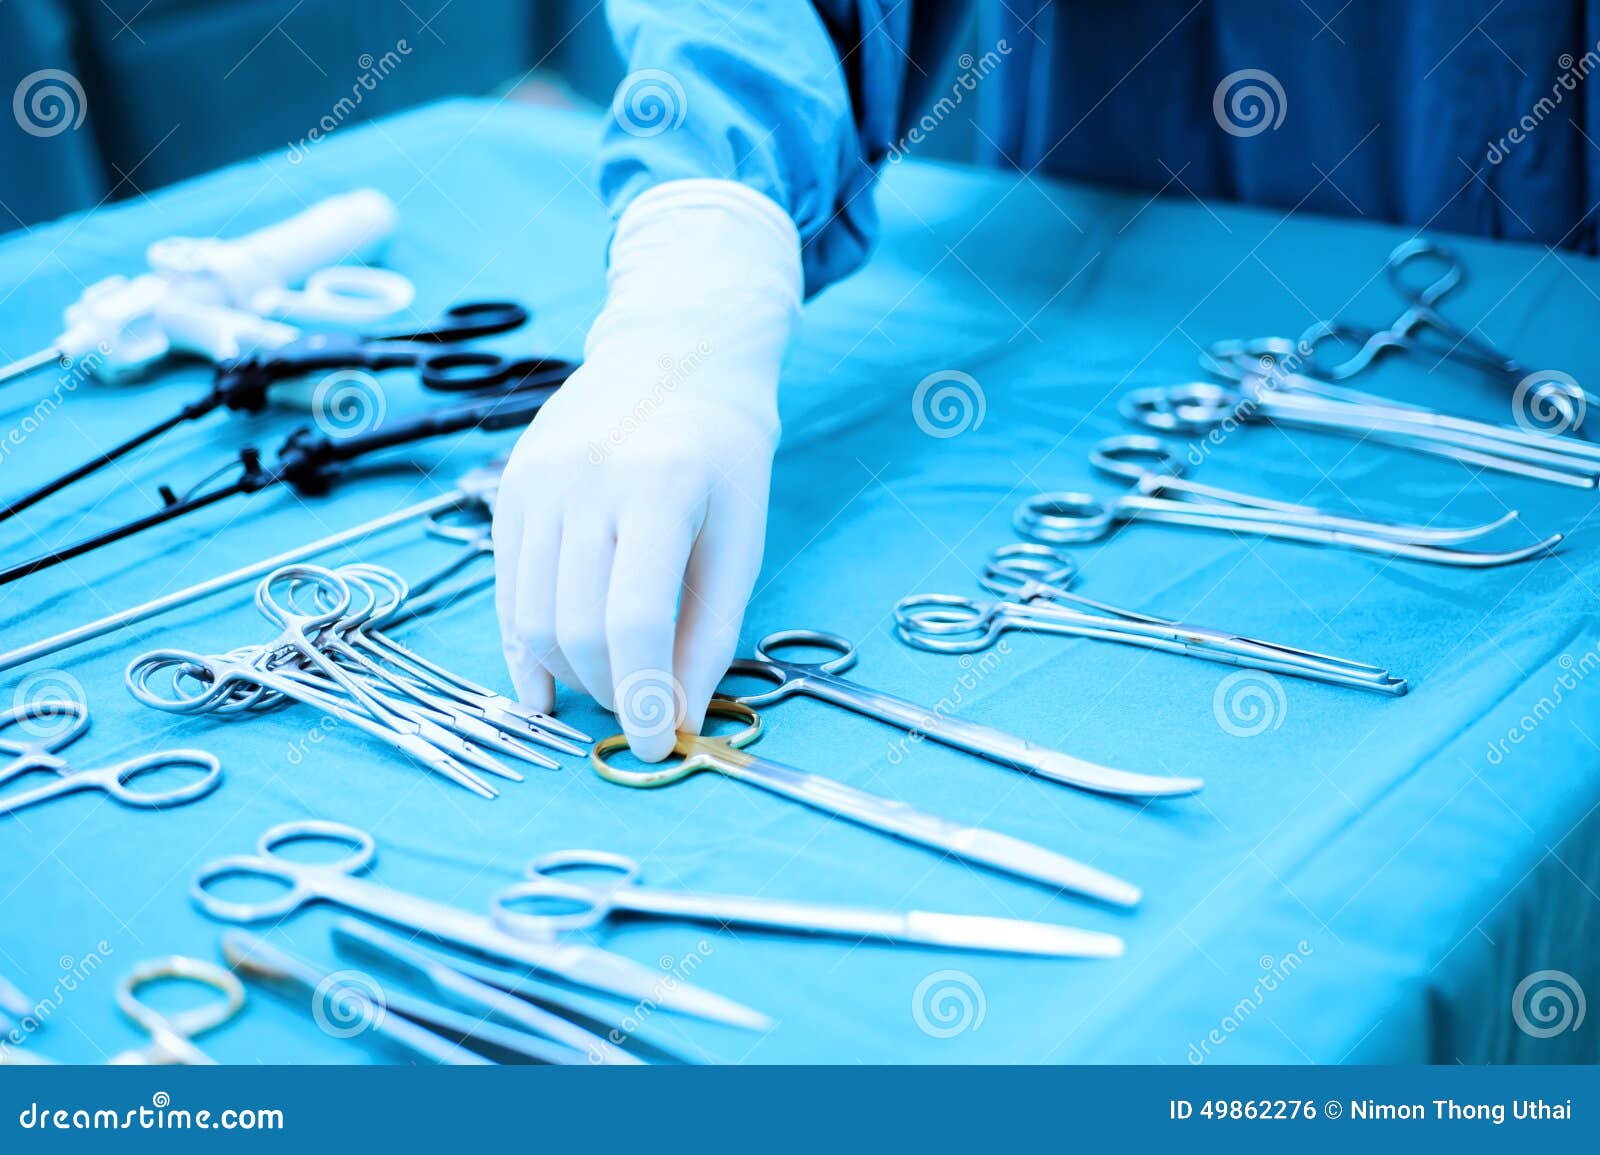 detail shot of steralized surgery instruments with a hand grabbing a tool